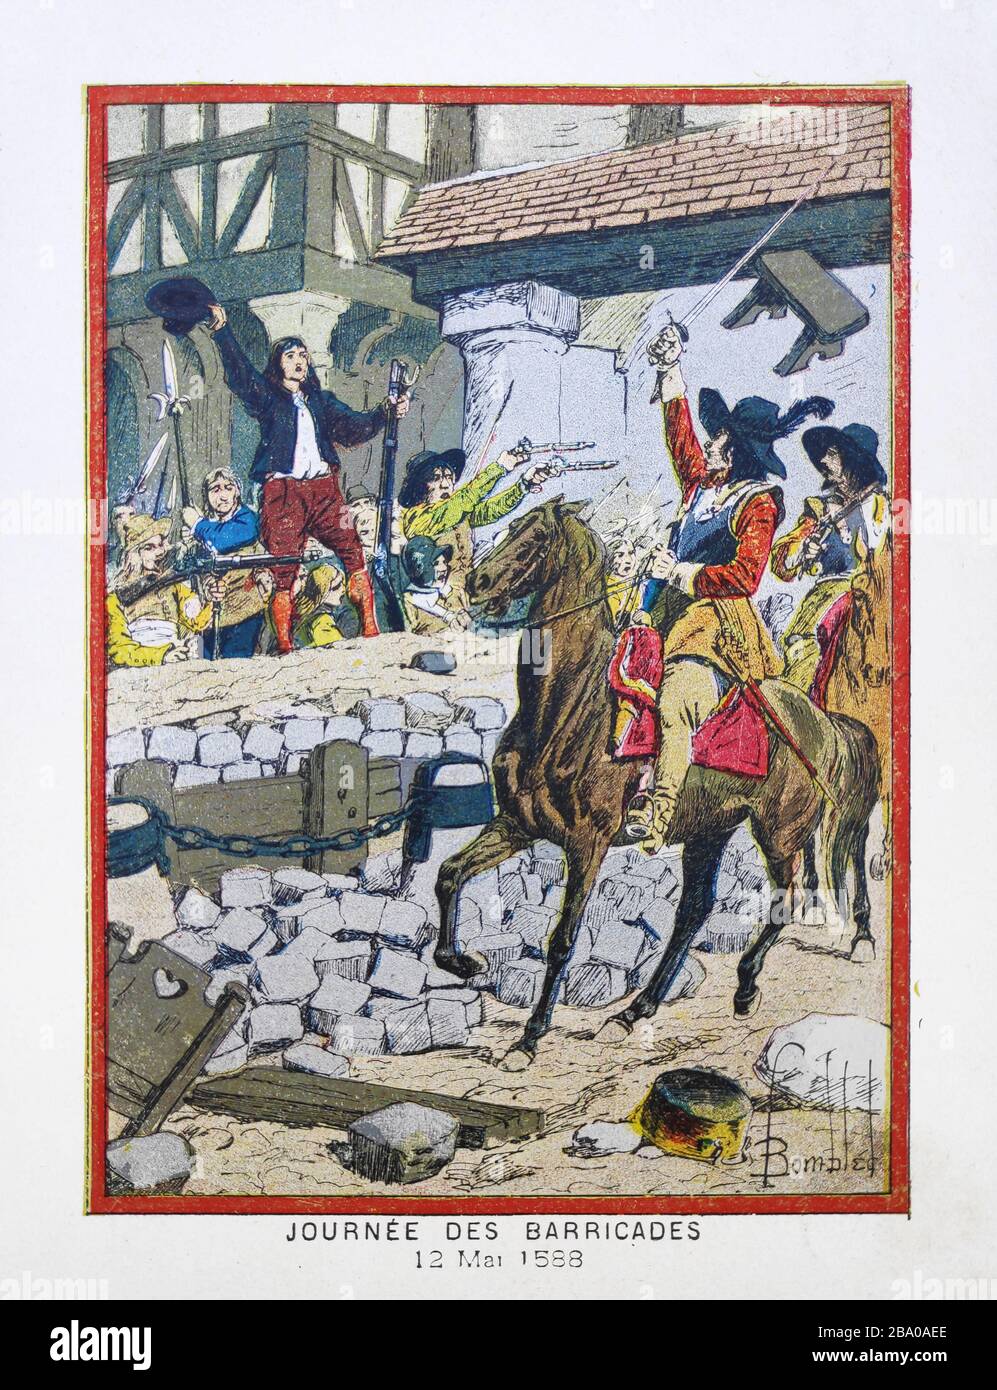 Old illustration by 'L. Bombled' about the Day of the barricades during the French wars of religion printed in late 19th century. Stock Photo